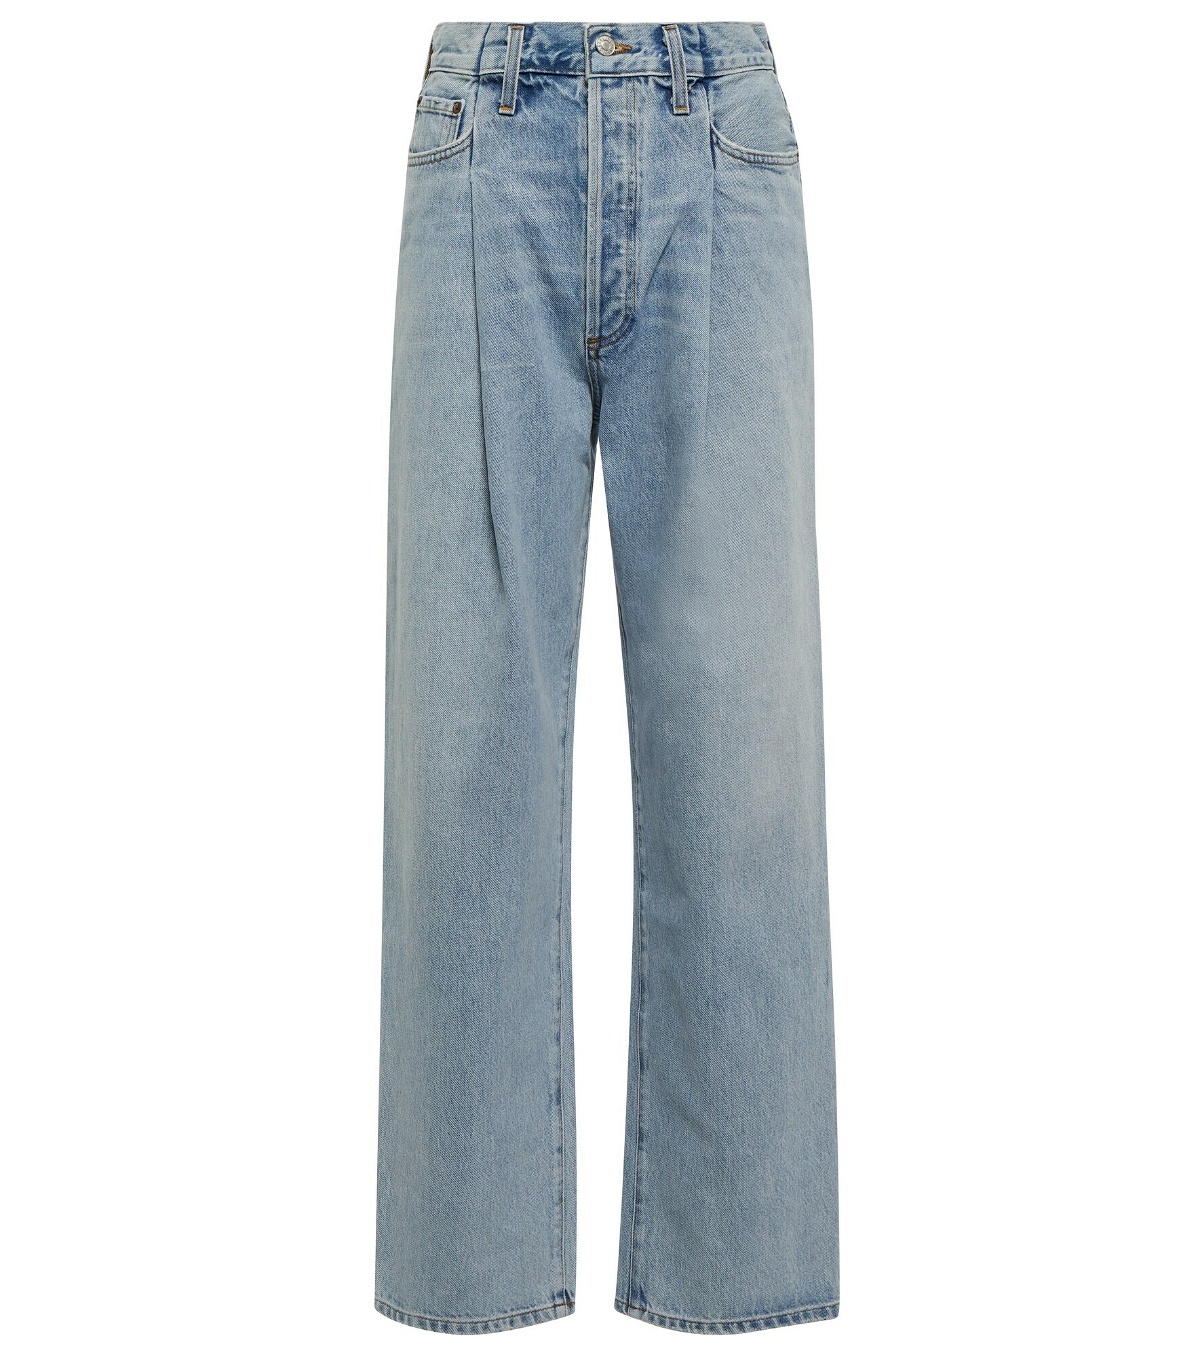 Agolde - High-rise tapered jeans AGOLDE